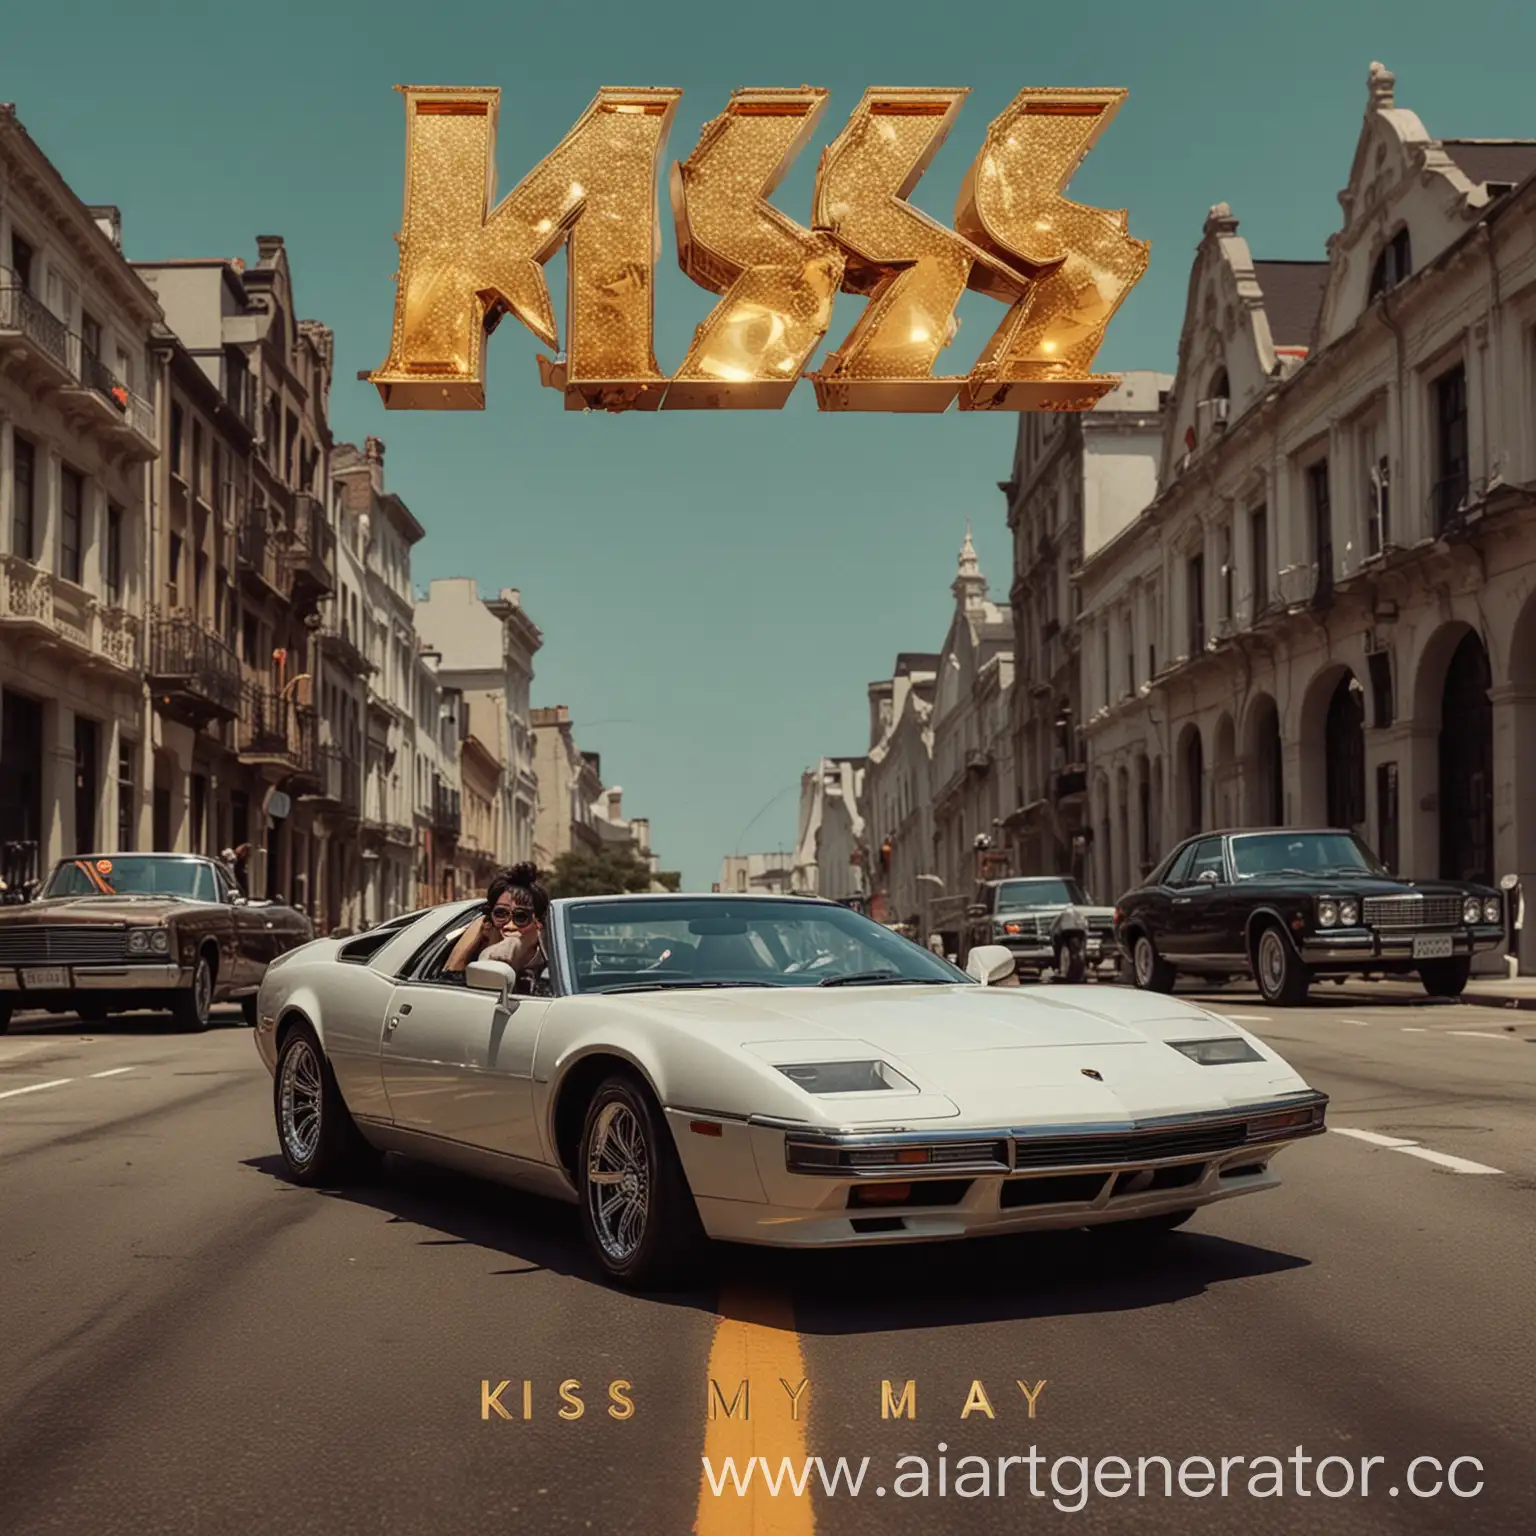 Luxury-Cars-and-Bold-Rap-Statement-Kiss-My-Day